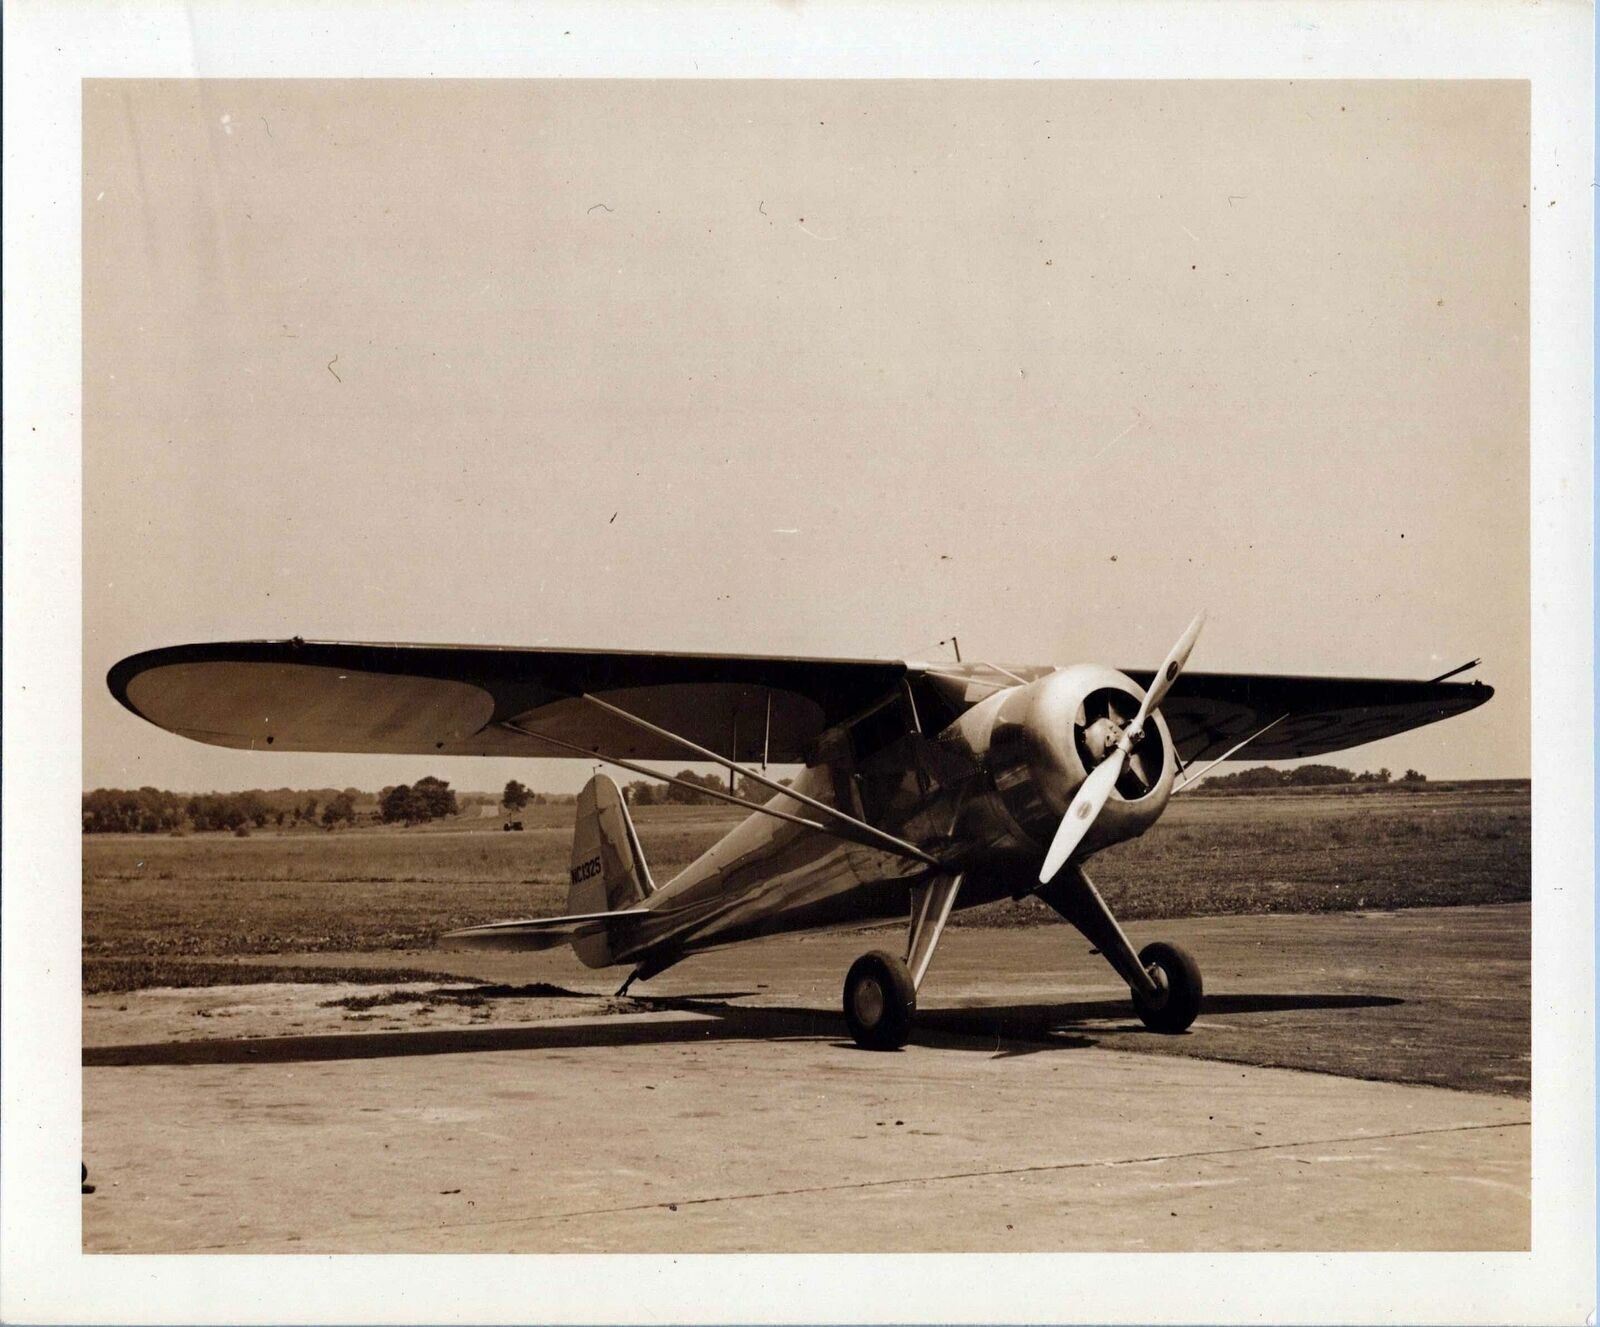 LUSCOMBE 90 AIRCRAFT VINTAGE PHOTO